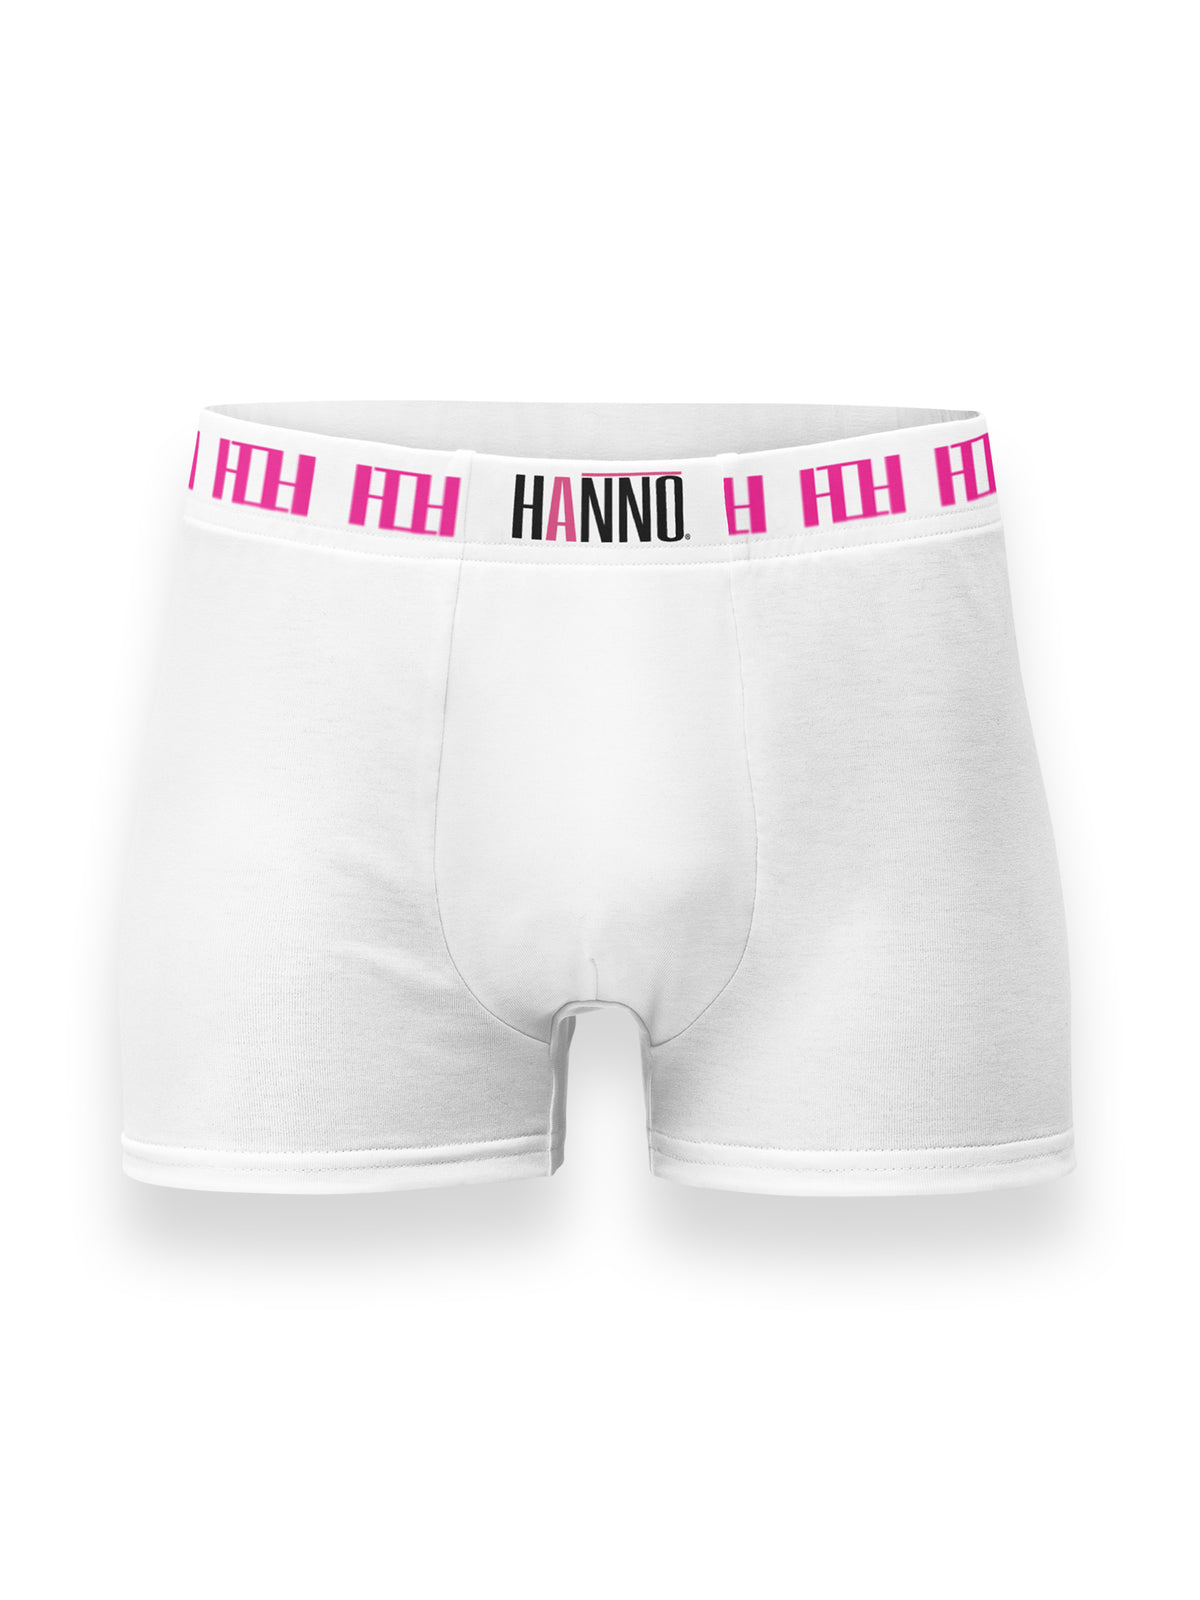 white boxer unisex with black hanno logo and pink double H